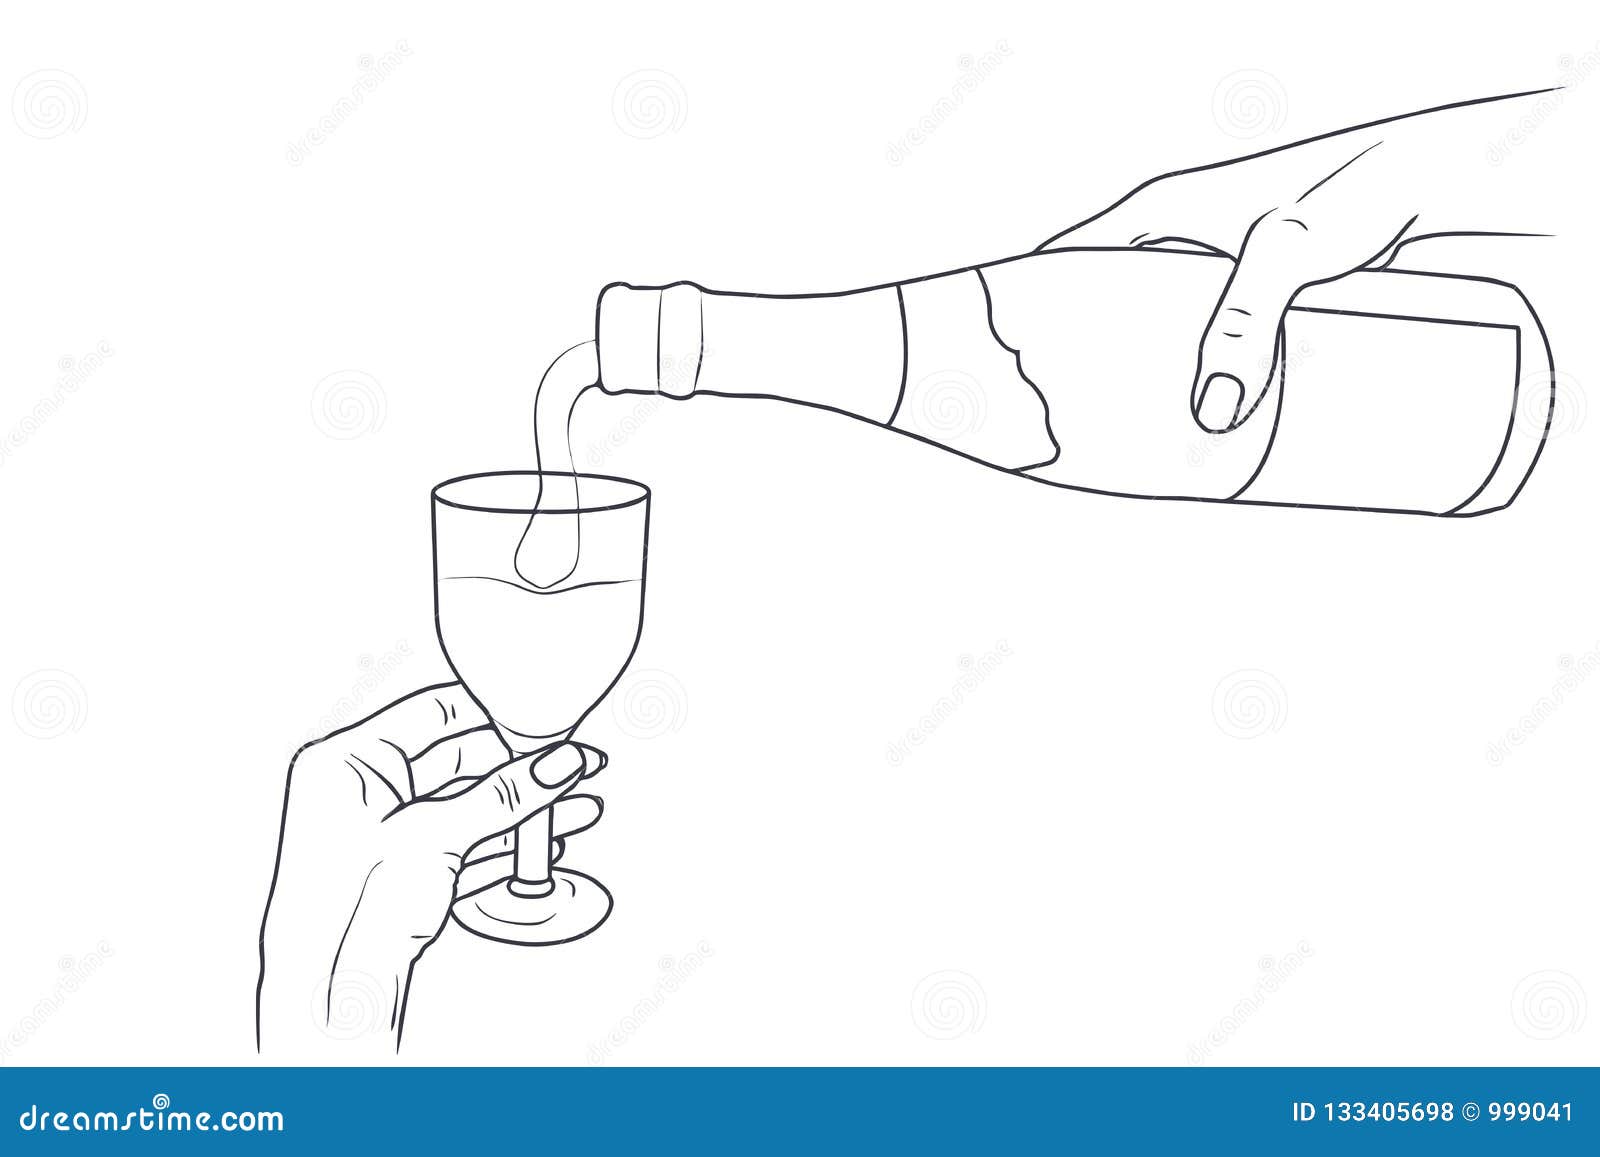 Vector Sketch Illustration - Women`s Hands Pouring Alcohol into a Glass